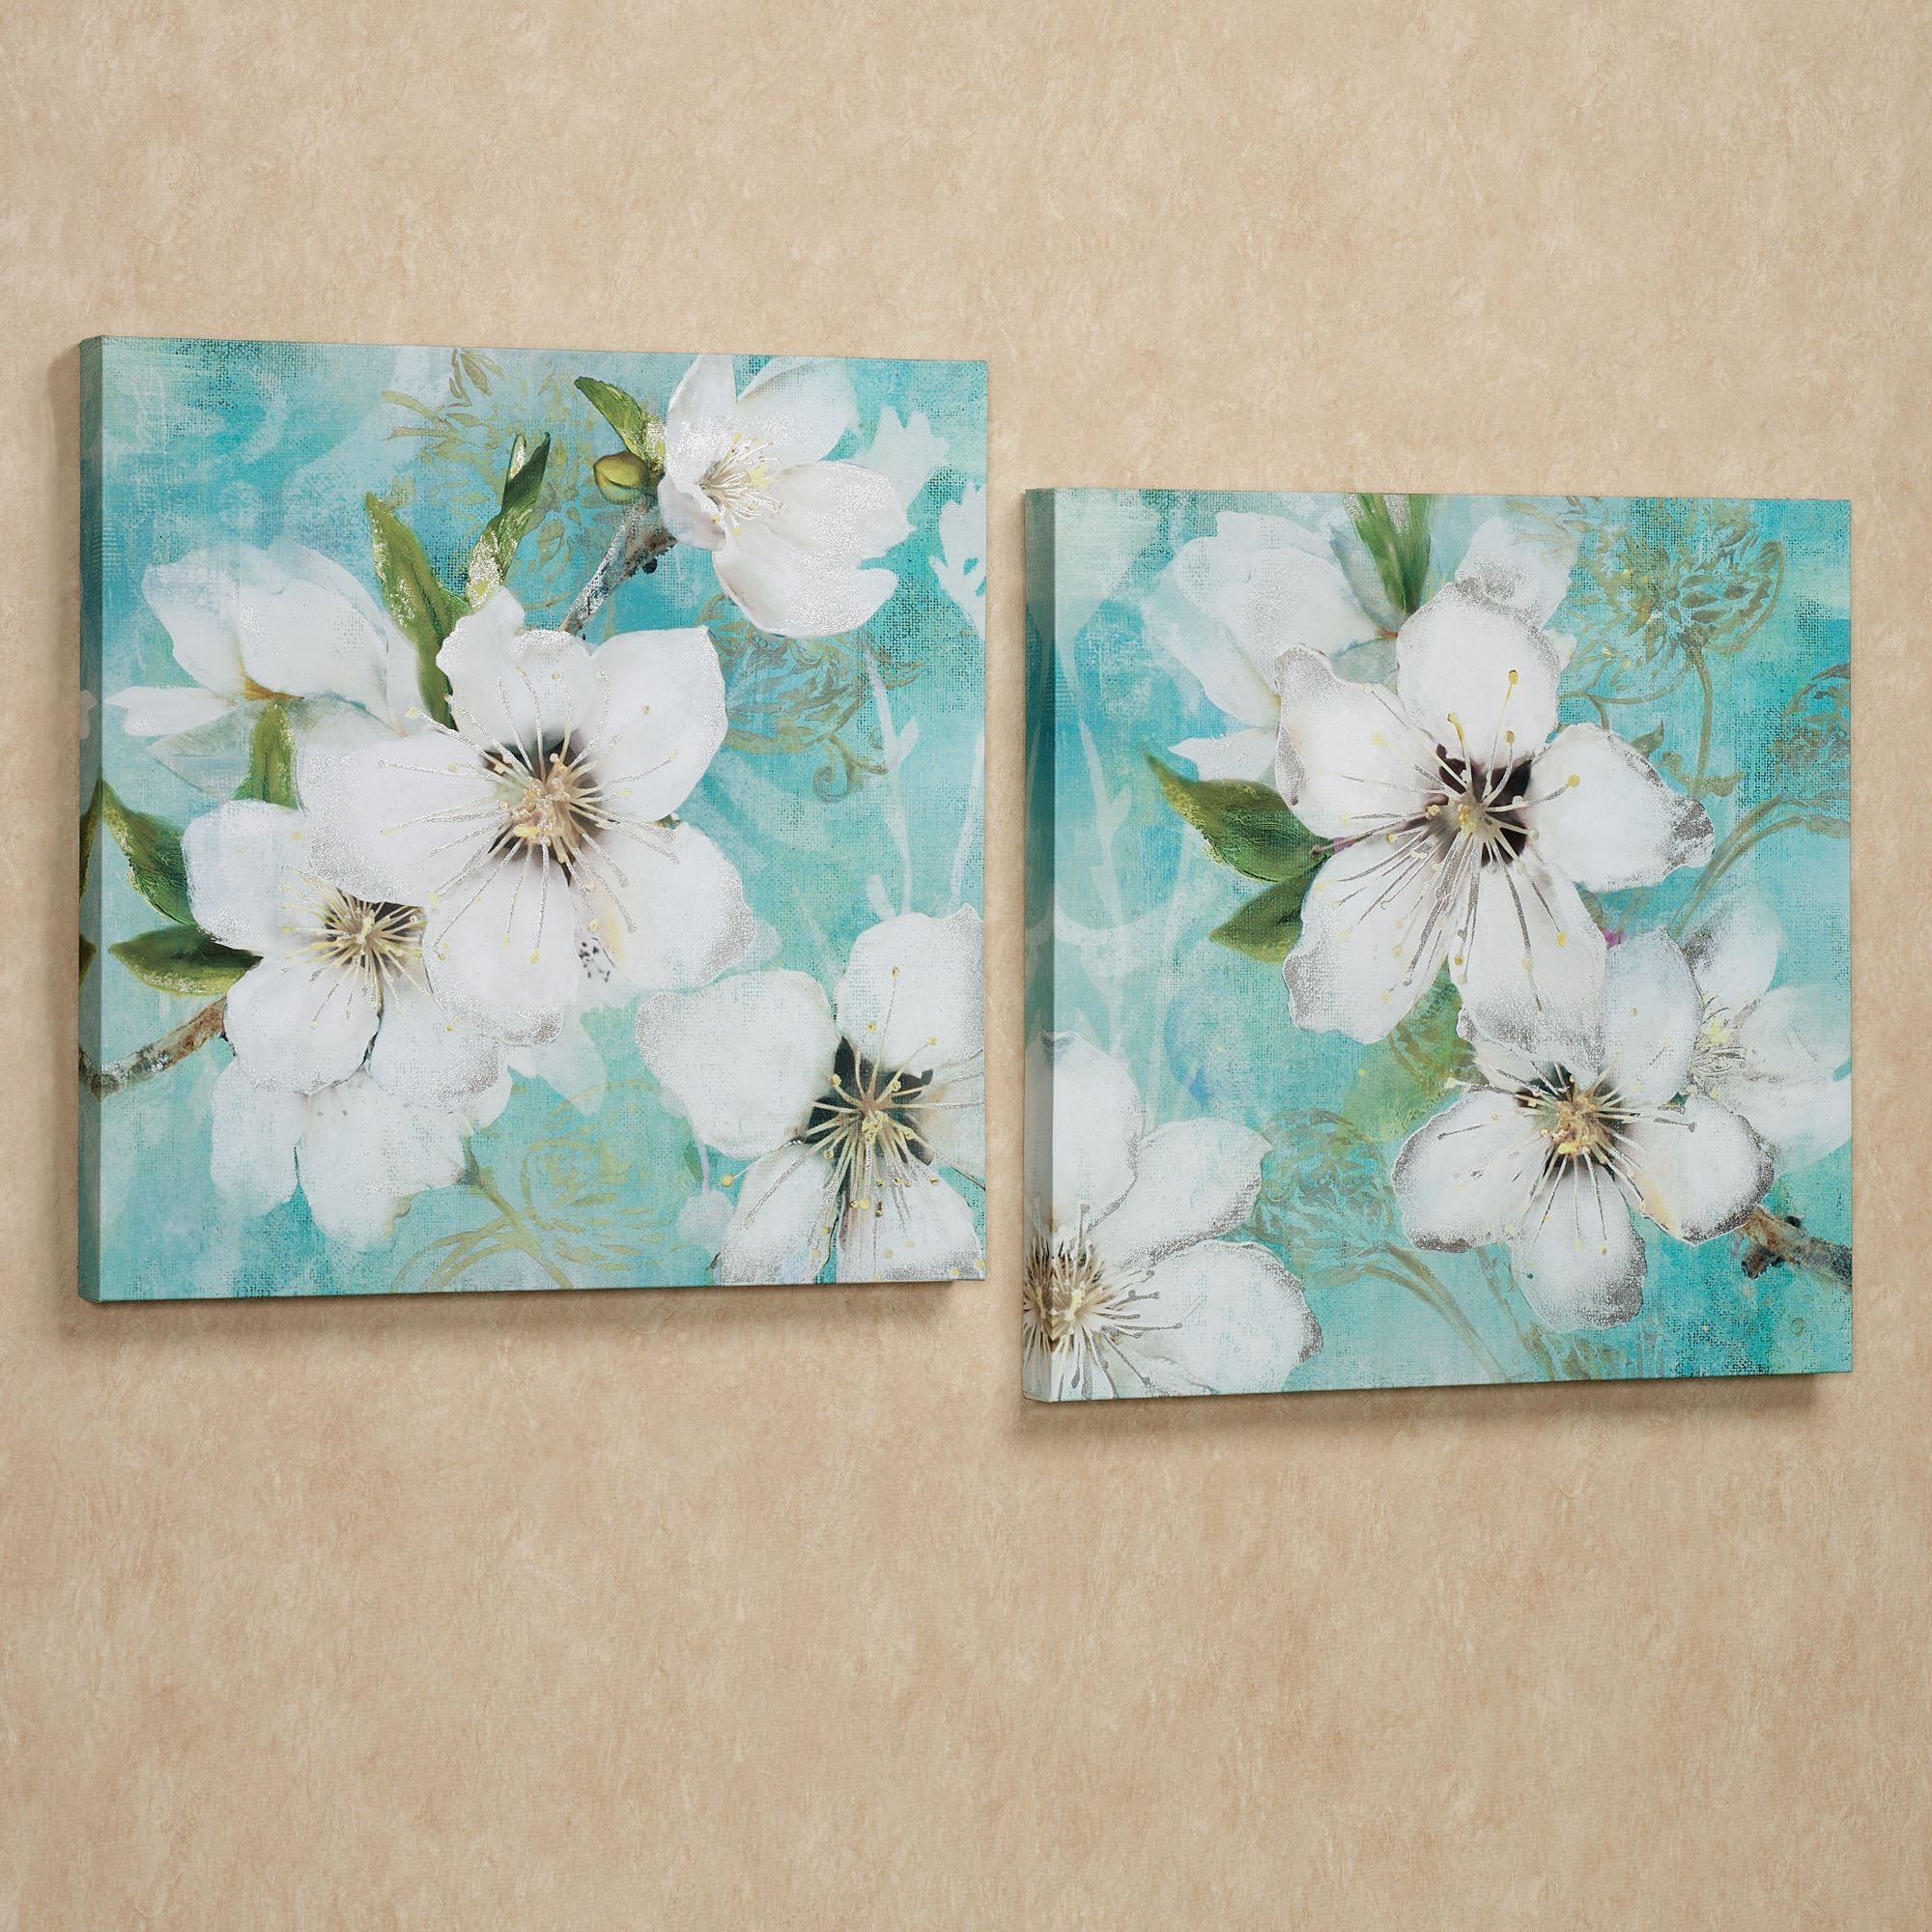 Flowers In Bloom Giclee Canvas Wall Art Set With Regard To Most Up To Date Crestview Bloom Wall Art (View 15 of 20)